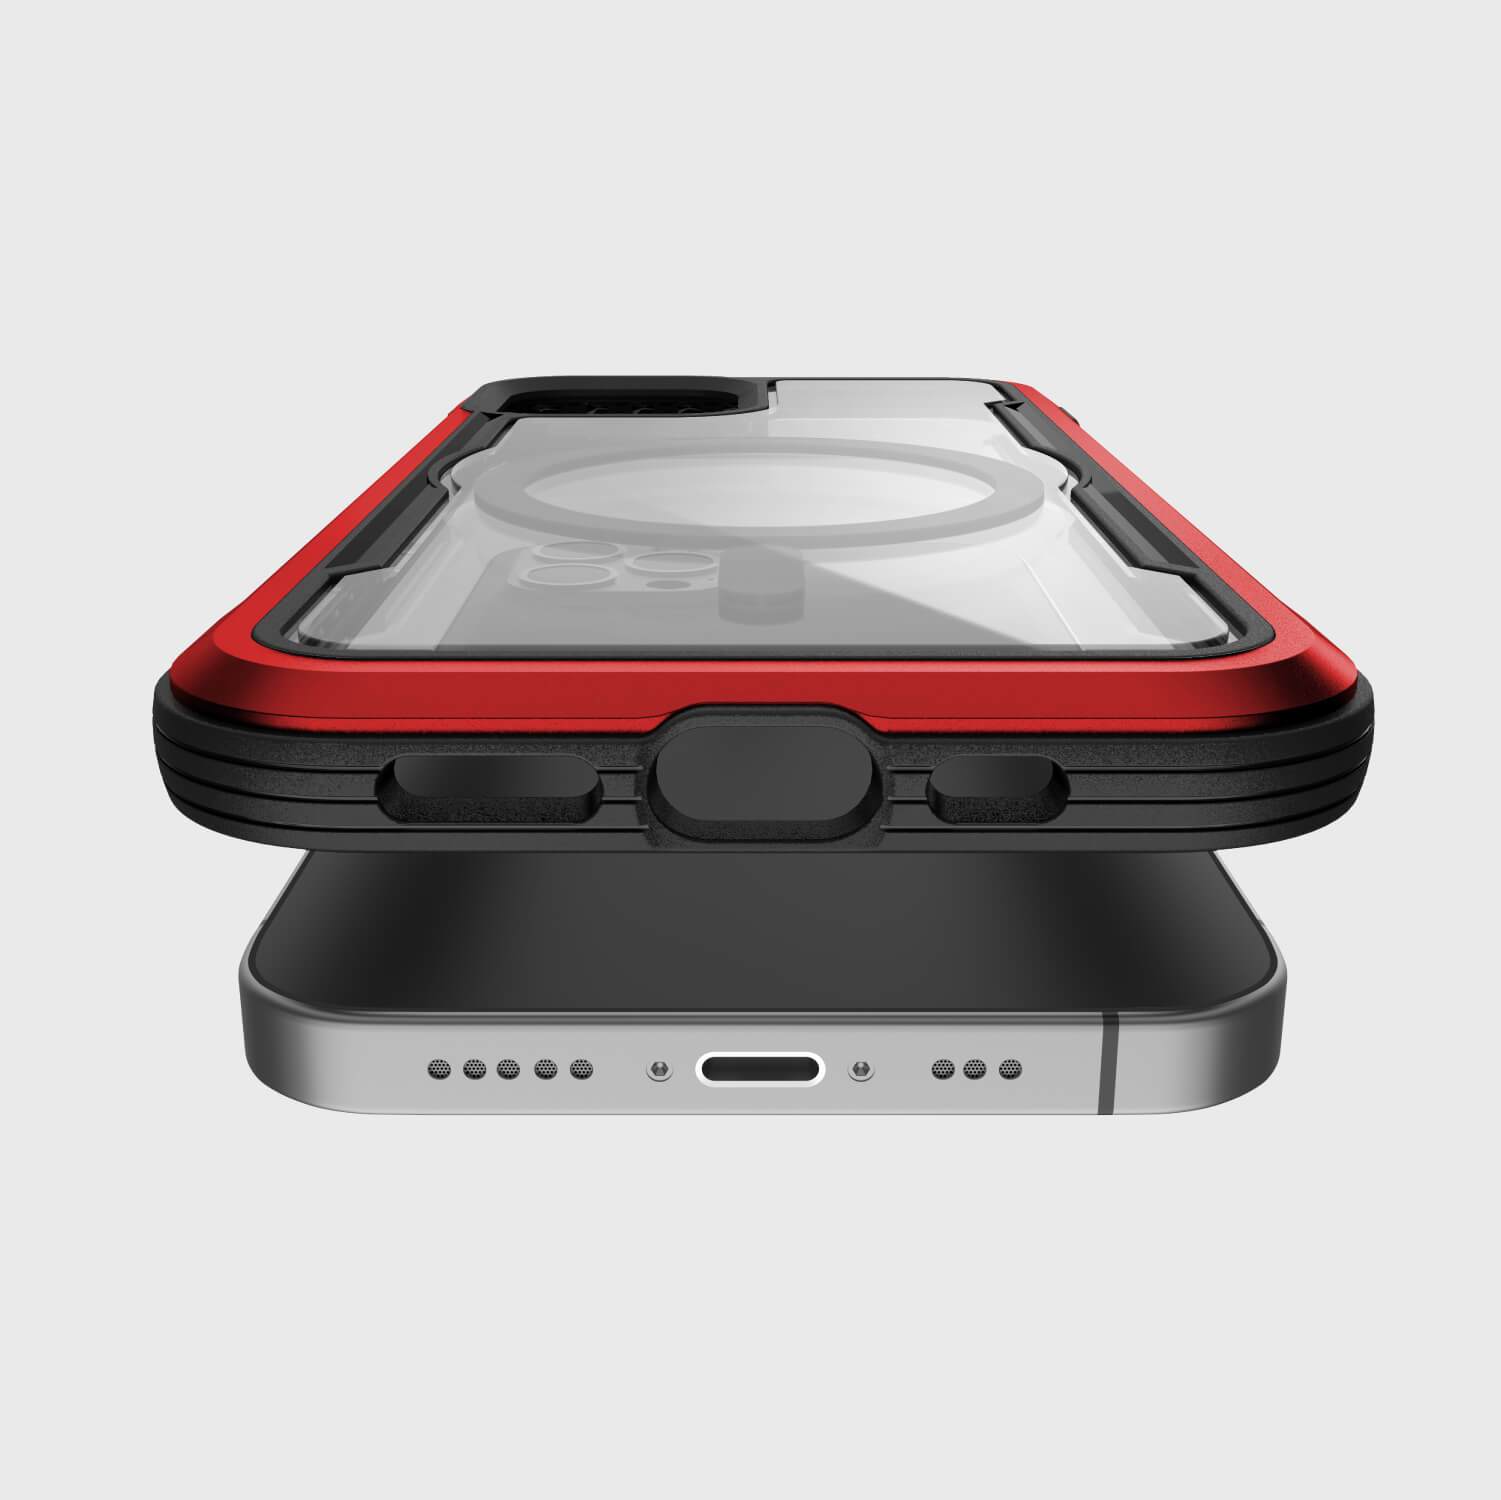 A red and black Raptic iPhone 12 Pro Max Case - SHIELD PRO MAGNET is shown on top of an iPhone 12 Pro Max.